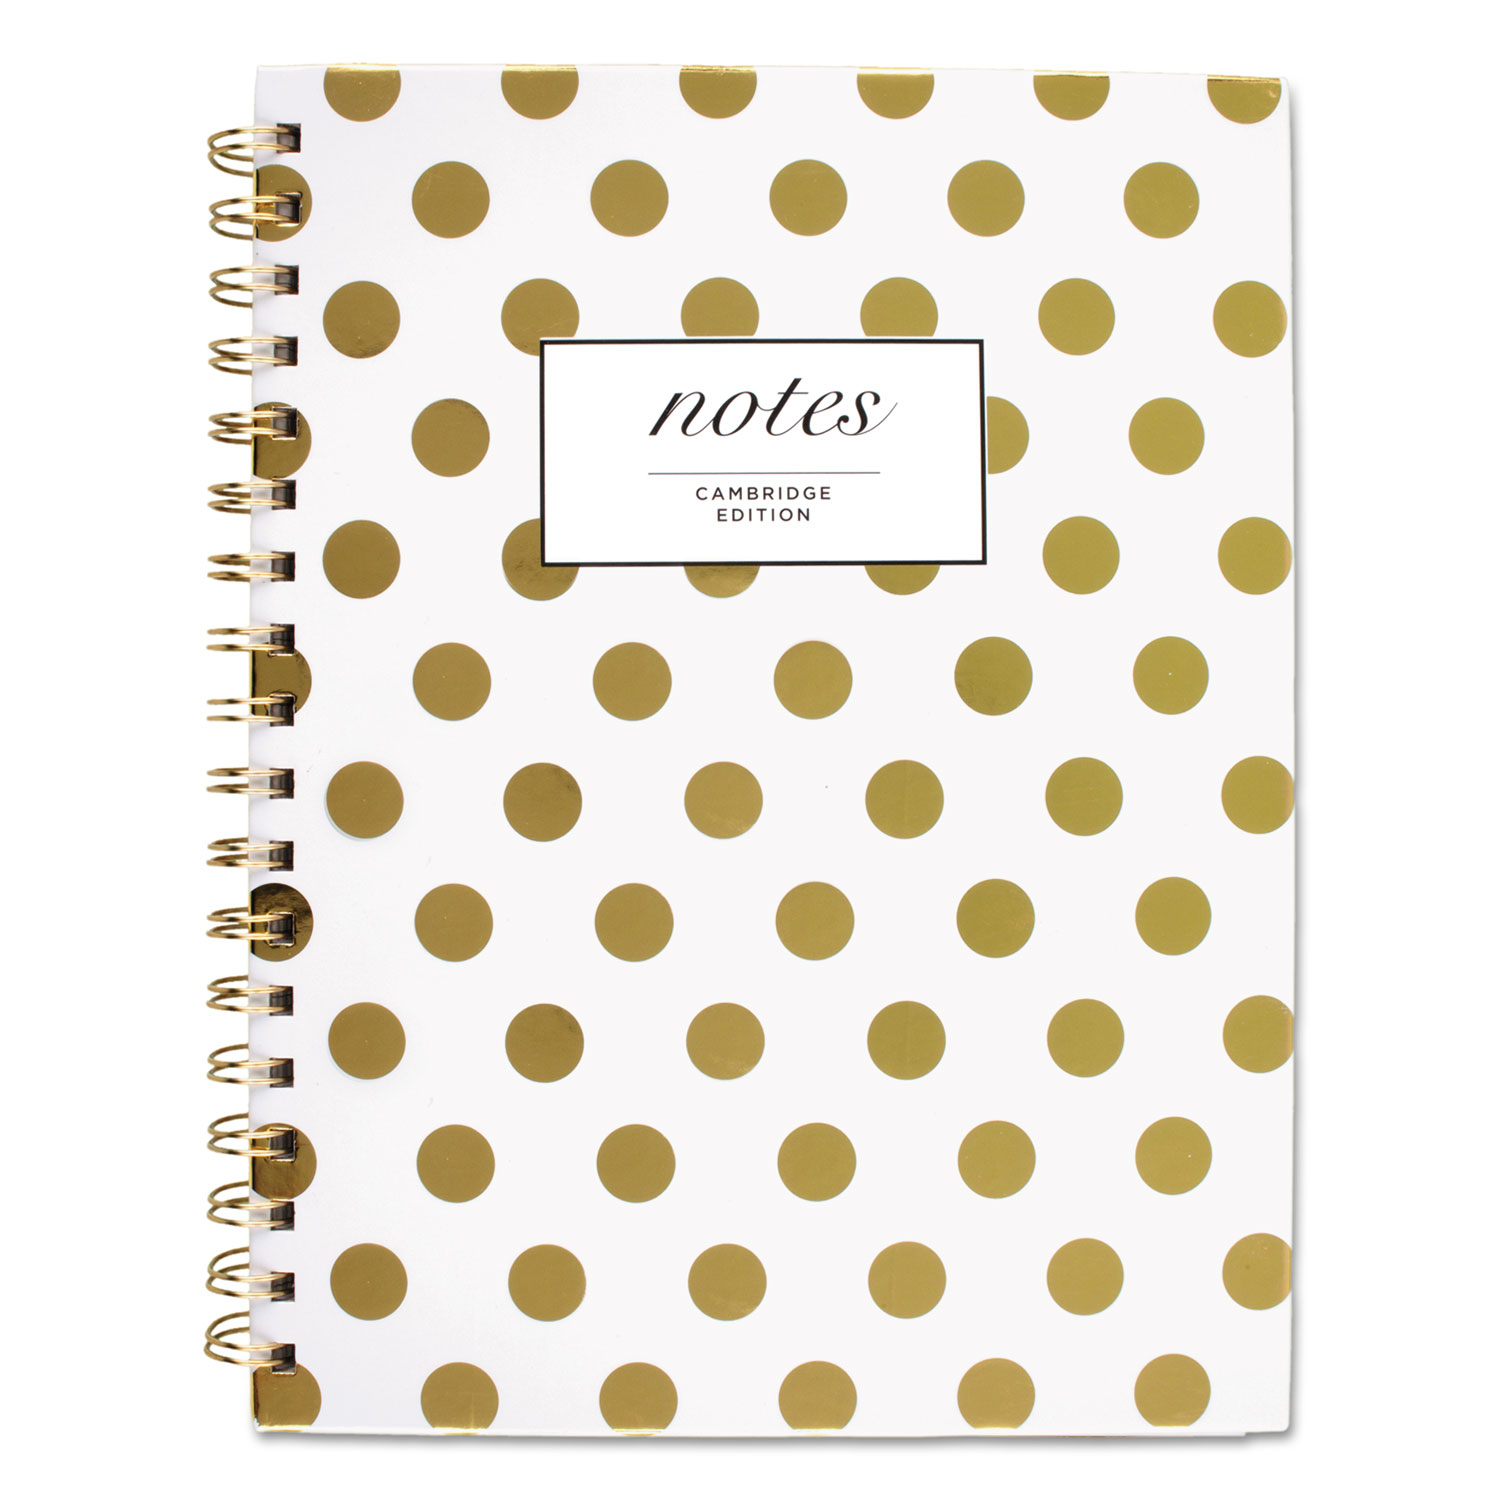  Cambridge 59016 Gold Dots Hardcover Notebook, 1 Subject, Wide/Legal Rule, White/Gold Dots Cover, 9.5 x 7, 80 Sheets (MEA59016) 